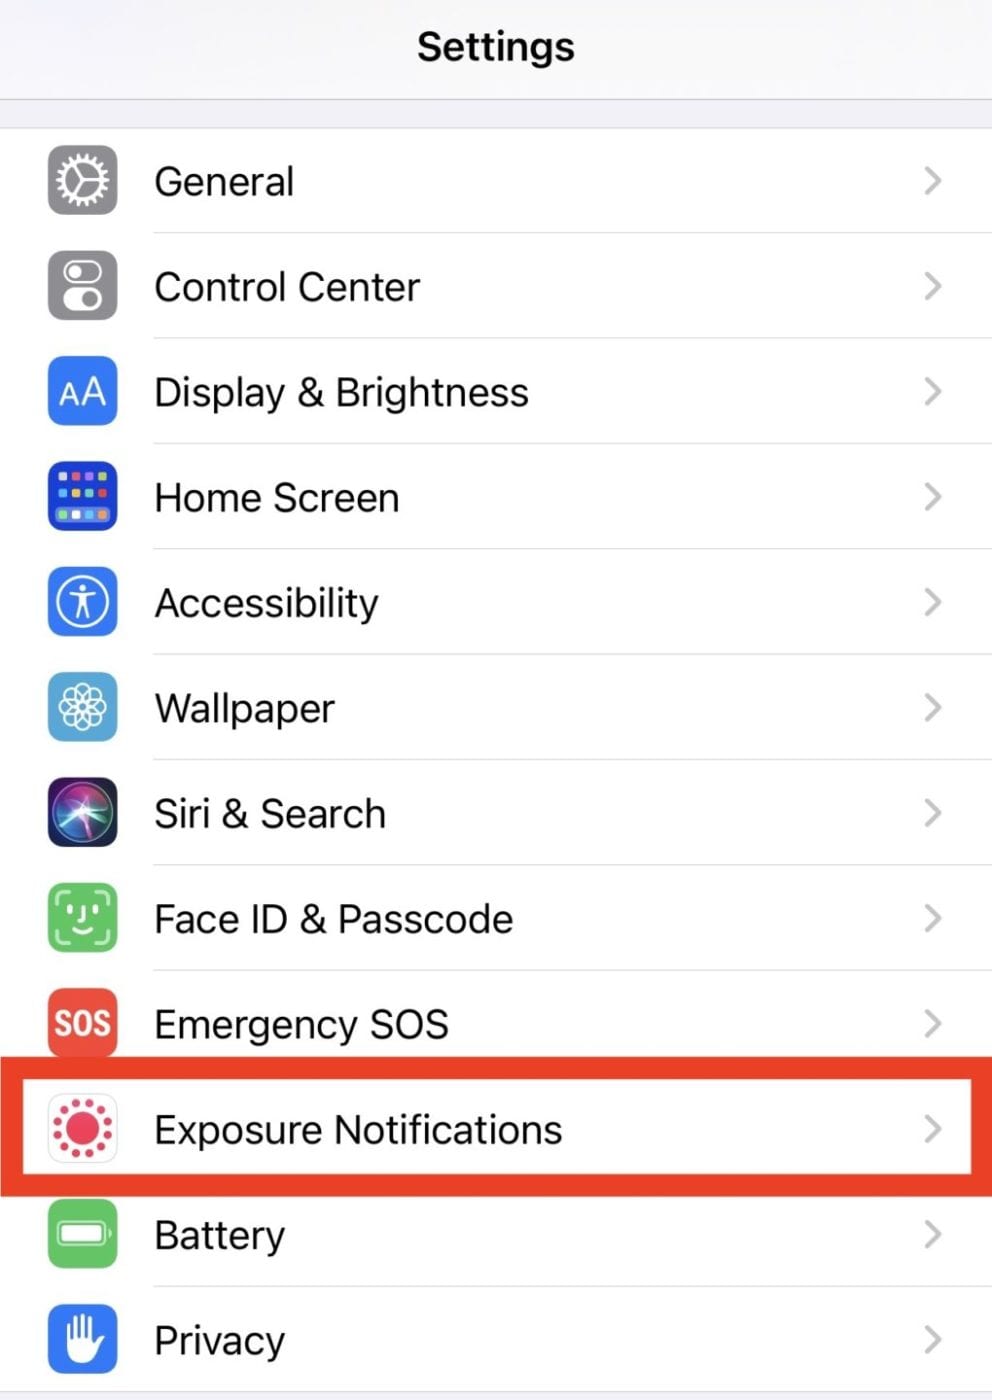 Exposure Notifications button in the iOS Settings